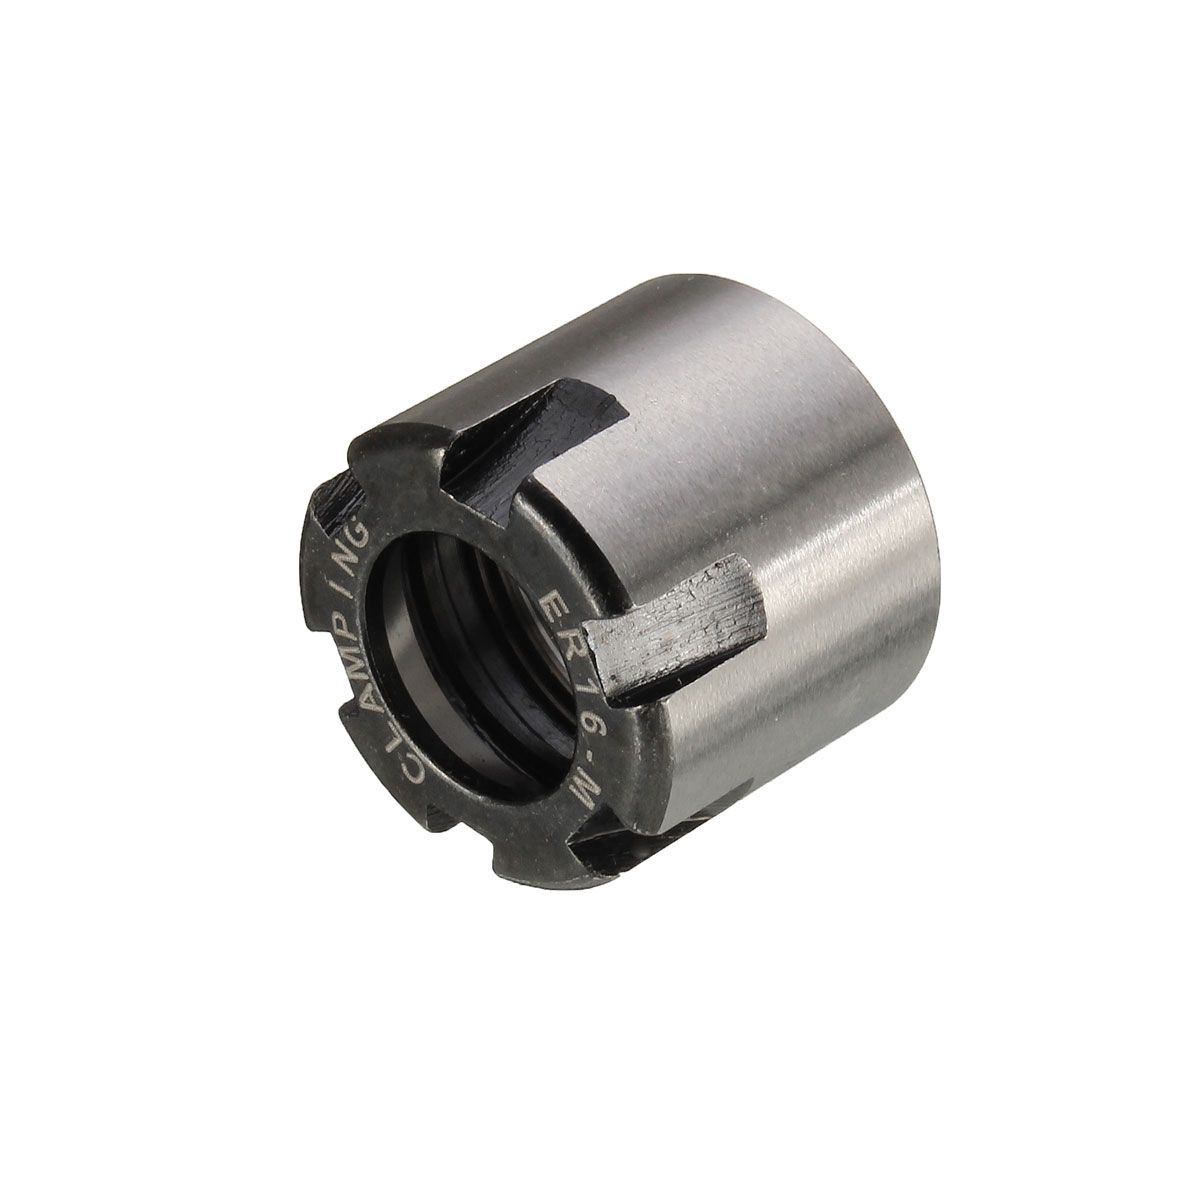 ER--A-M-Type-Nut-Collet-Clamping-Nut-for-CNC-Milling-Chuck-Holder-Lathe-Tool-1064956-6